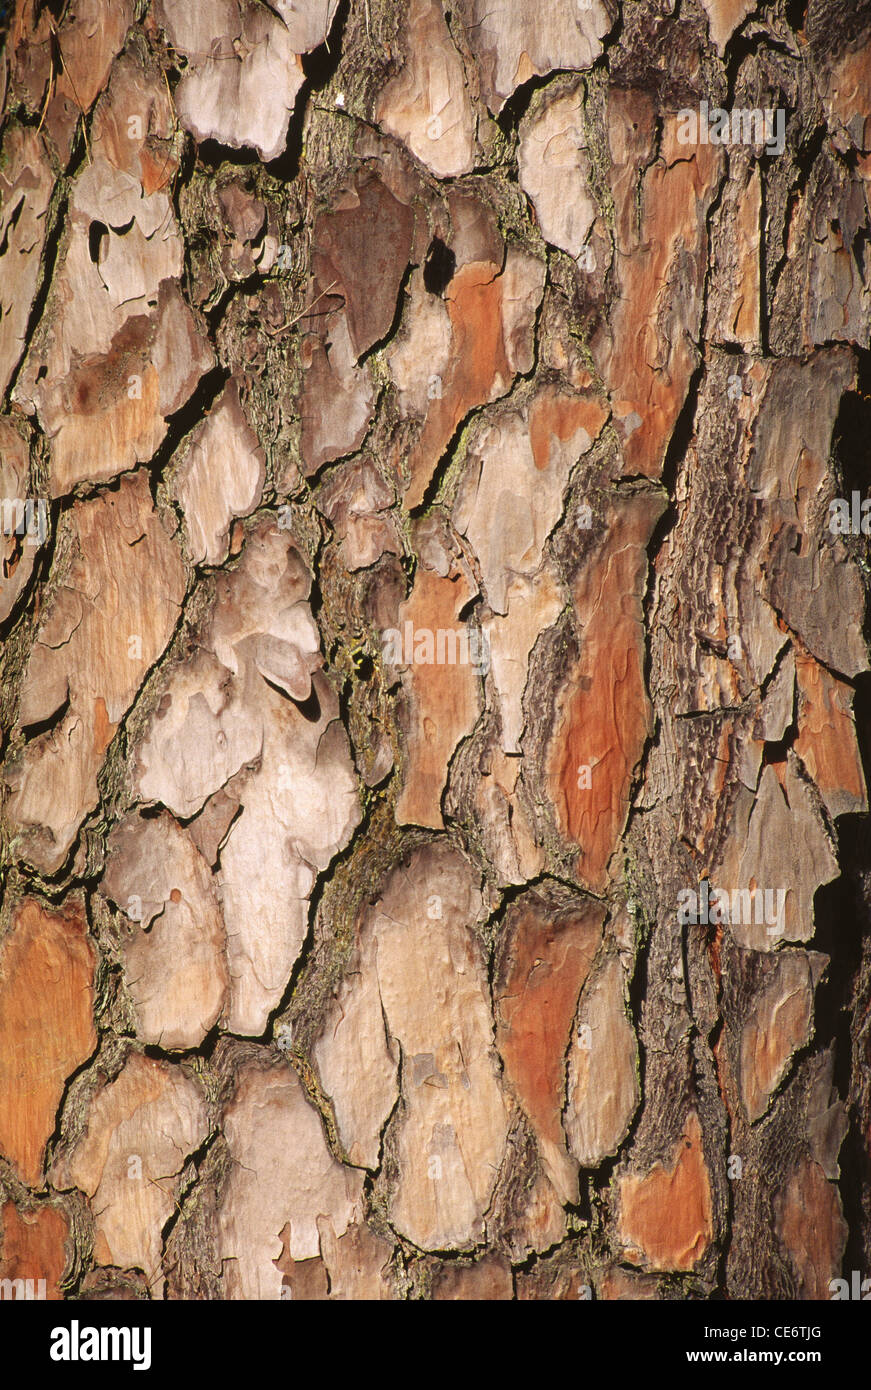 HMA 85932 : bark of a tree abstract design pattern background india Stock Photo